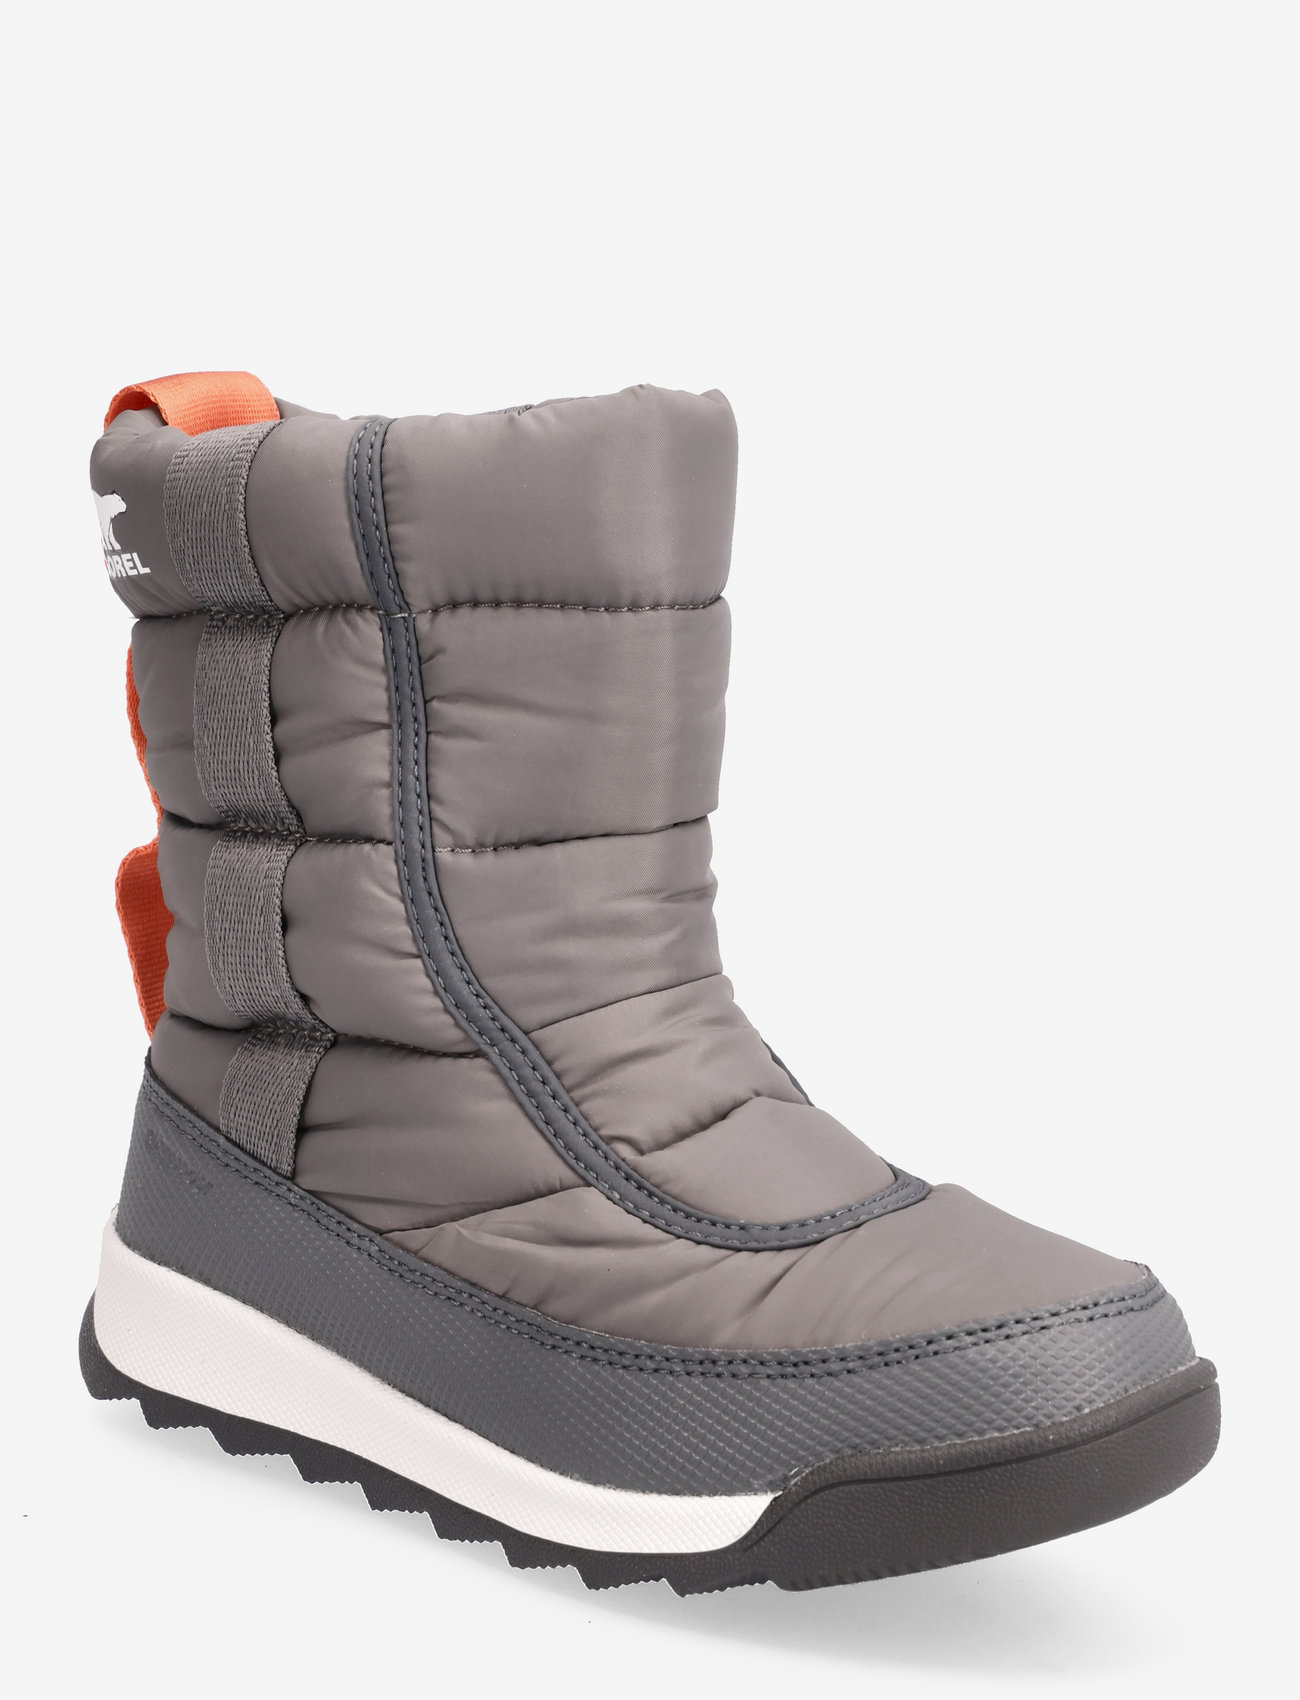 Sorel - YOUTH WHITNEY II PUFFY MID WP - winter boots - quarry, sea salt - 0